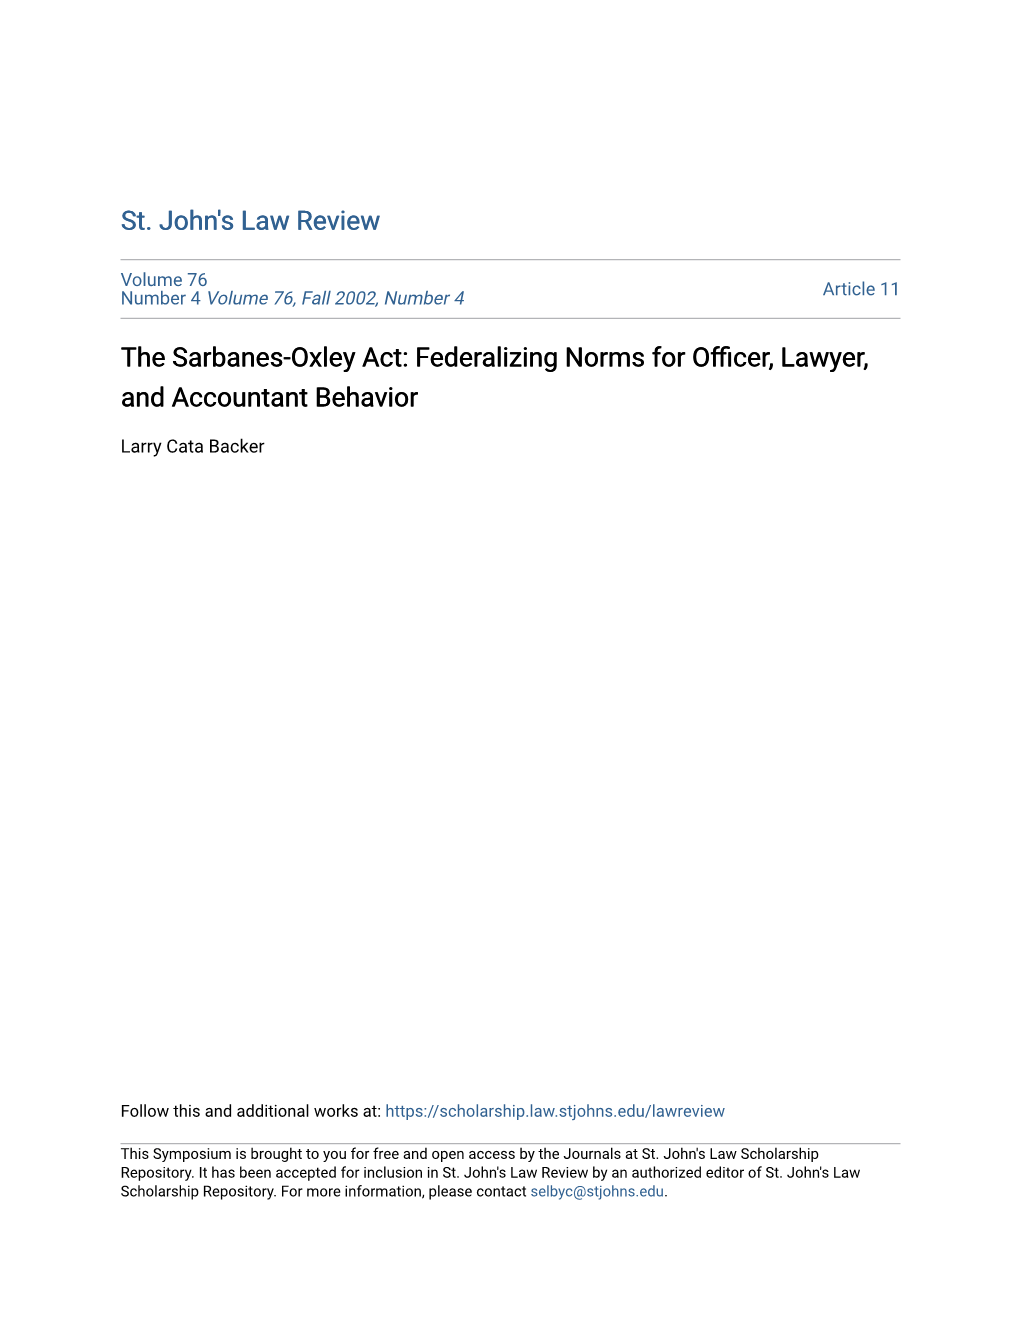 Federalizing Norms for Officer, Lawyer, and Accountant Behavior